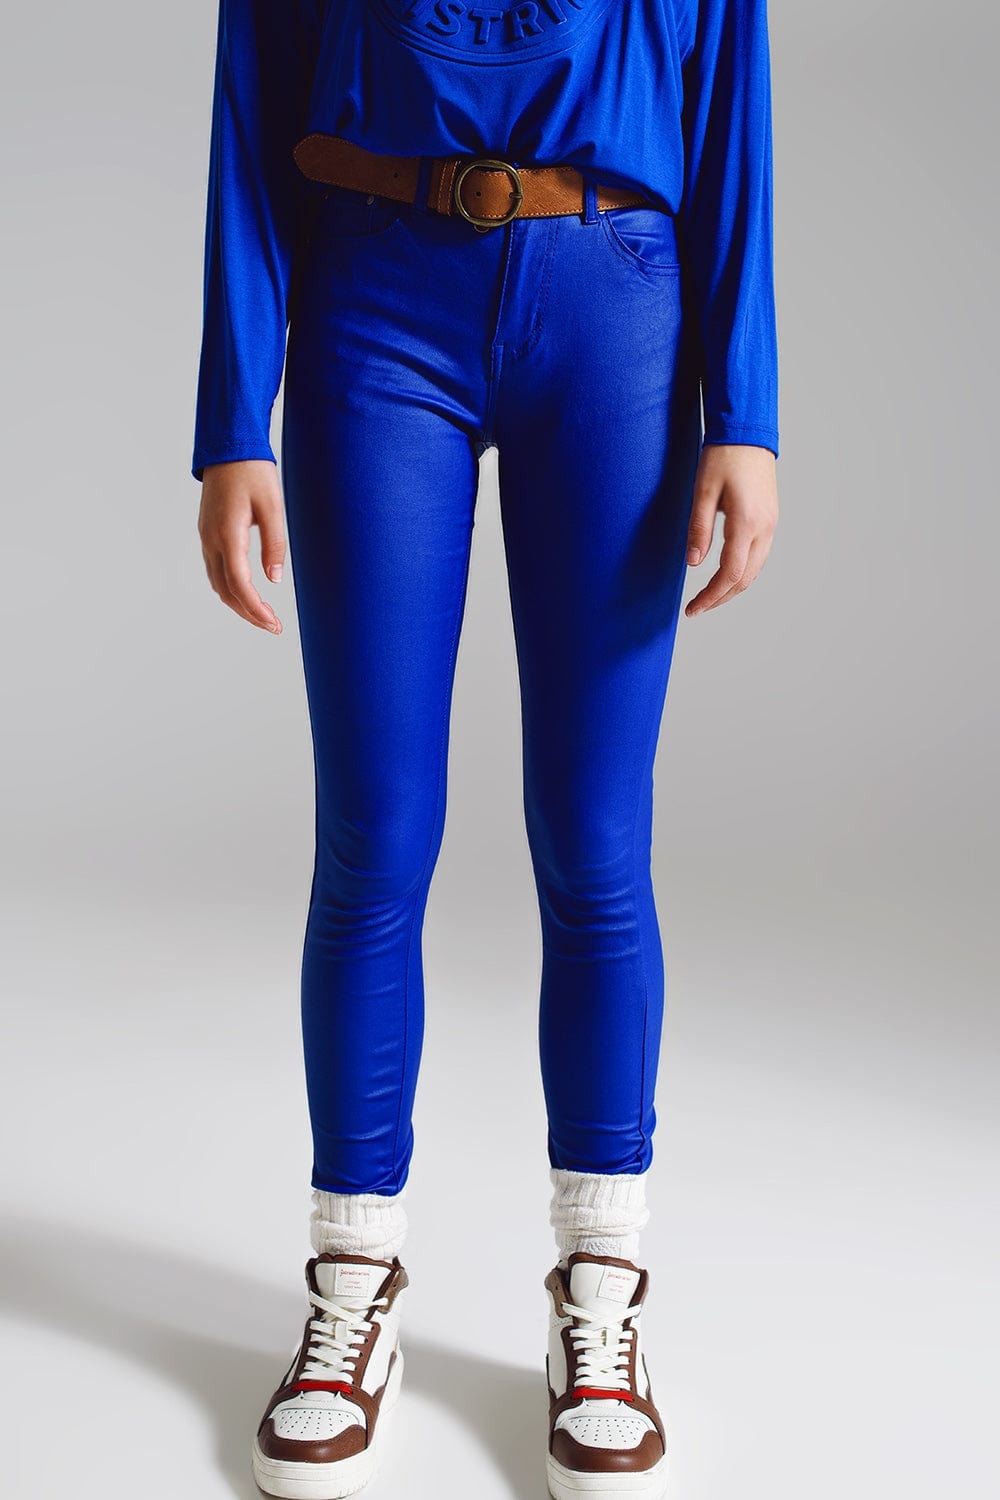 Q2 Women's Pants & Trousers Super Skinny Pants Faux Leather In Electric Blue